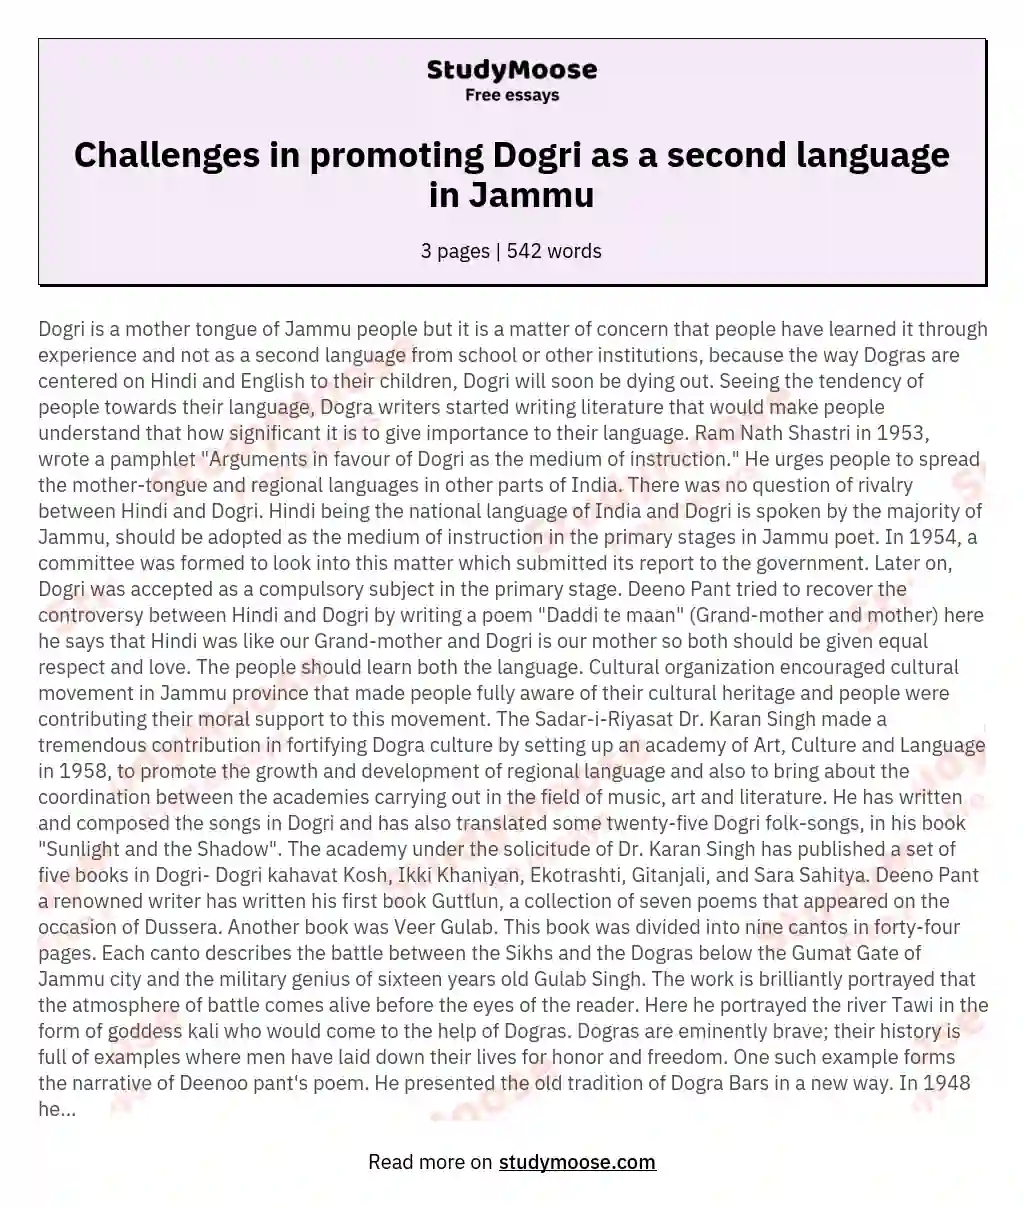 Challenges in promoting Dogri as a second language in Jammu essay